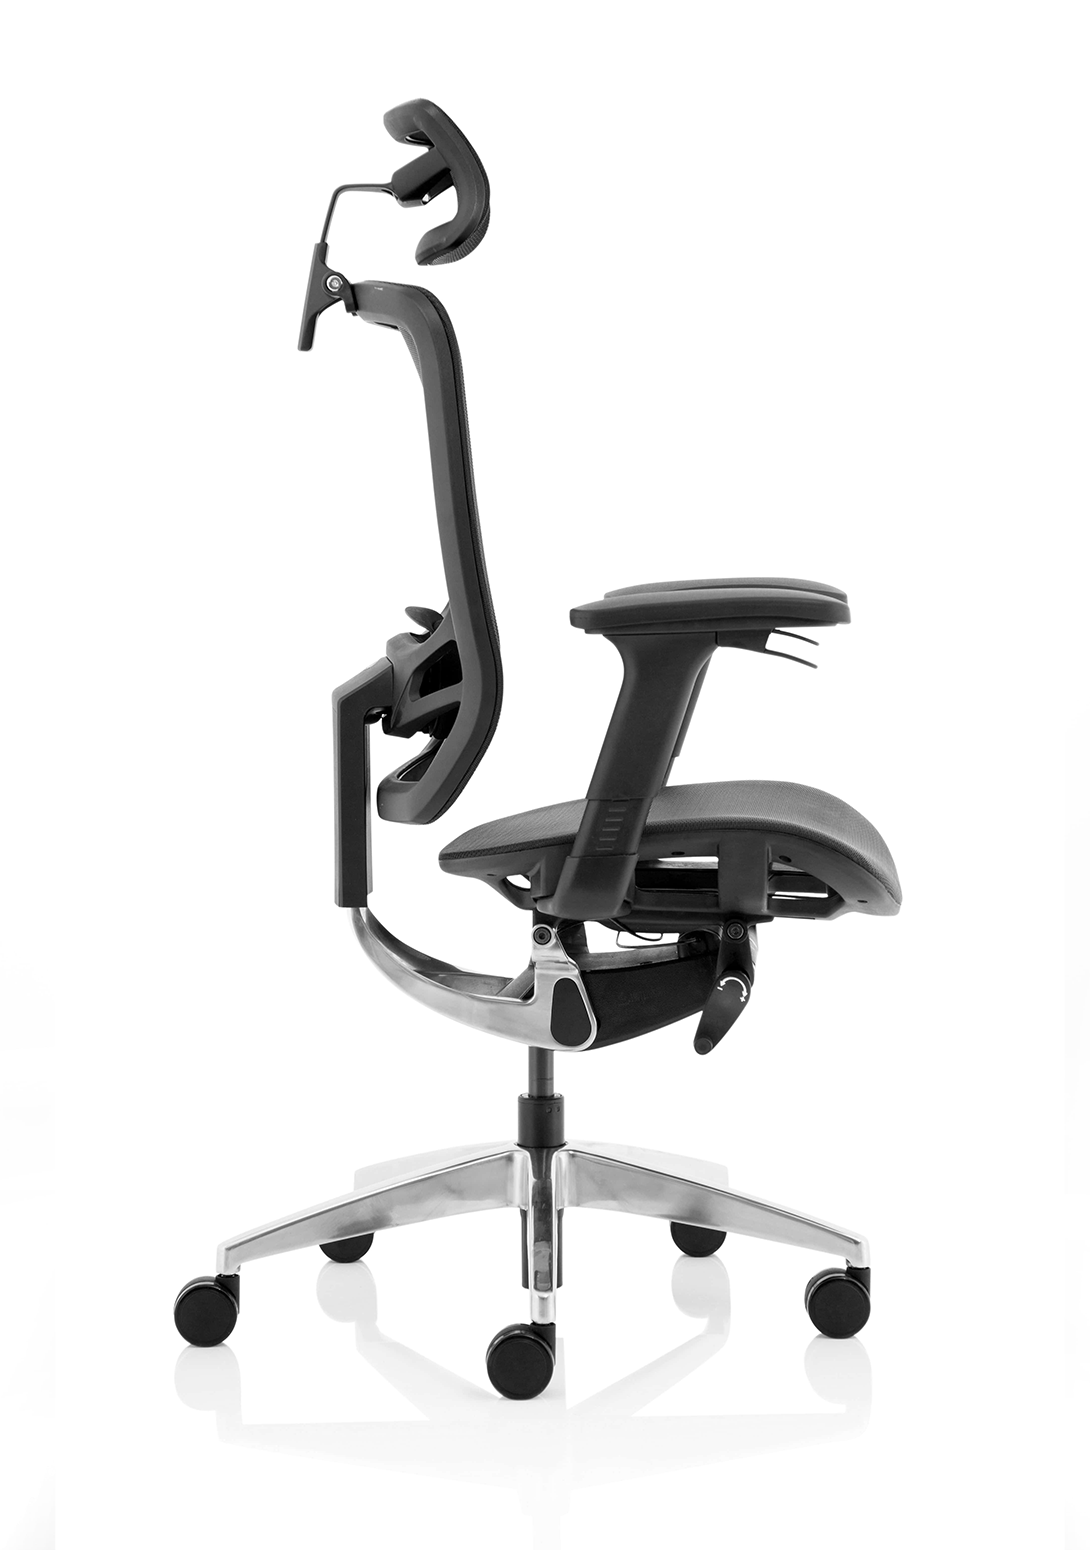 ErgoClick Home Office Chair | Posture Chair | Home Office Furniture | Combat poor posture | Chair that helps with posture | Ergonomic Office Furniture